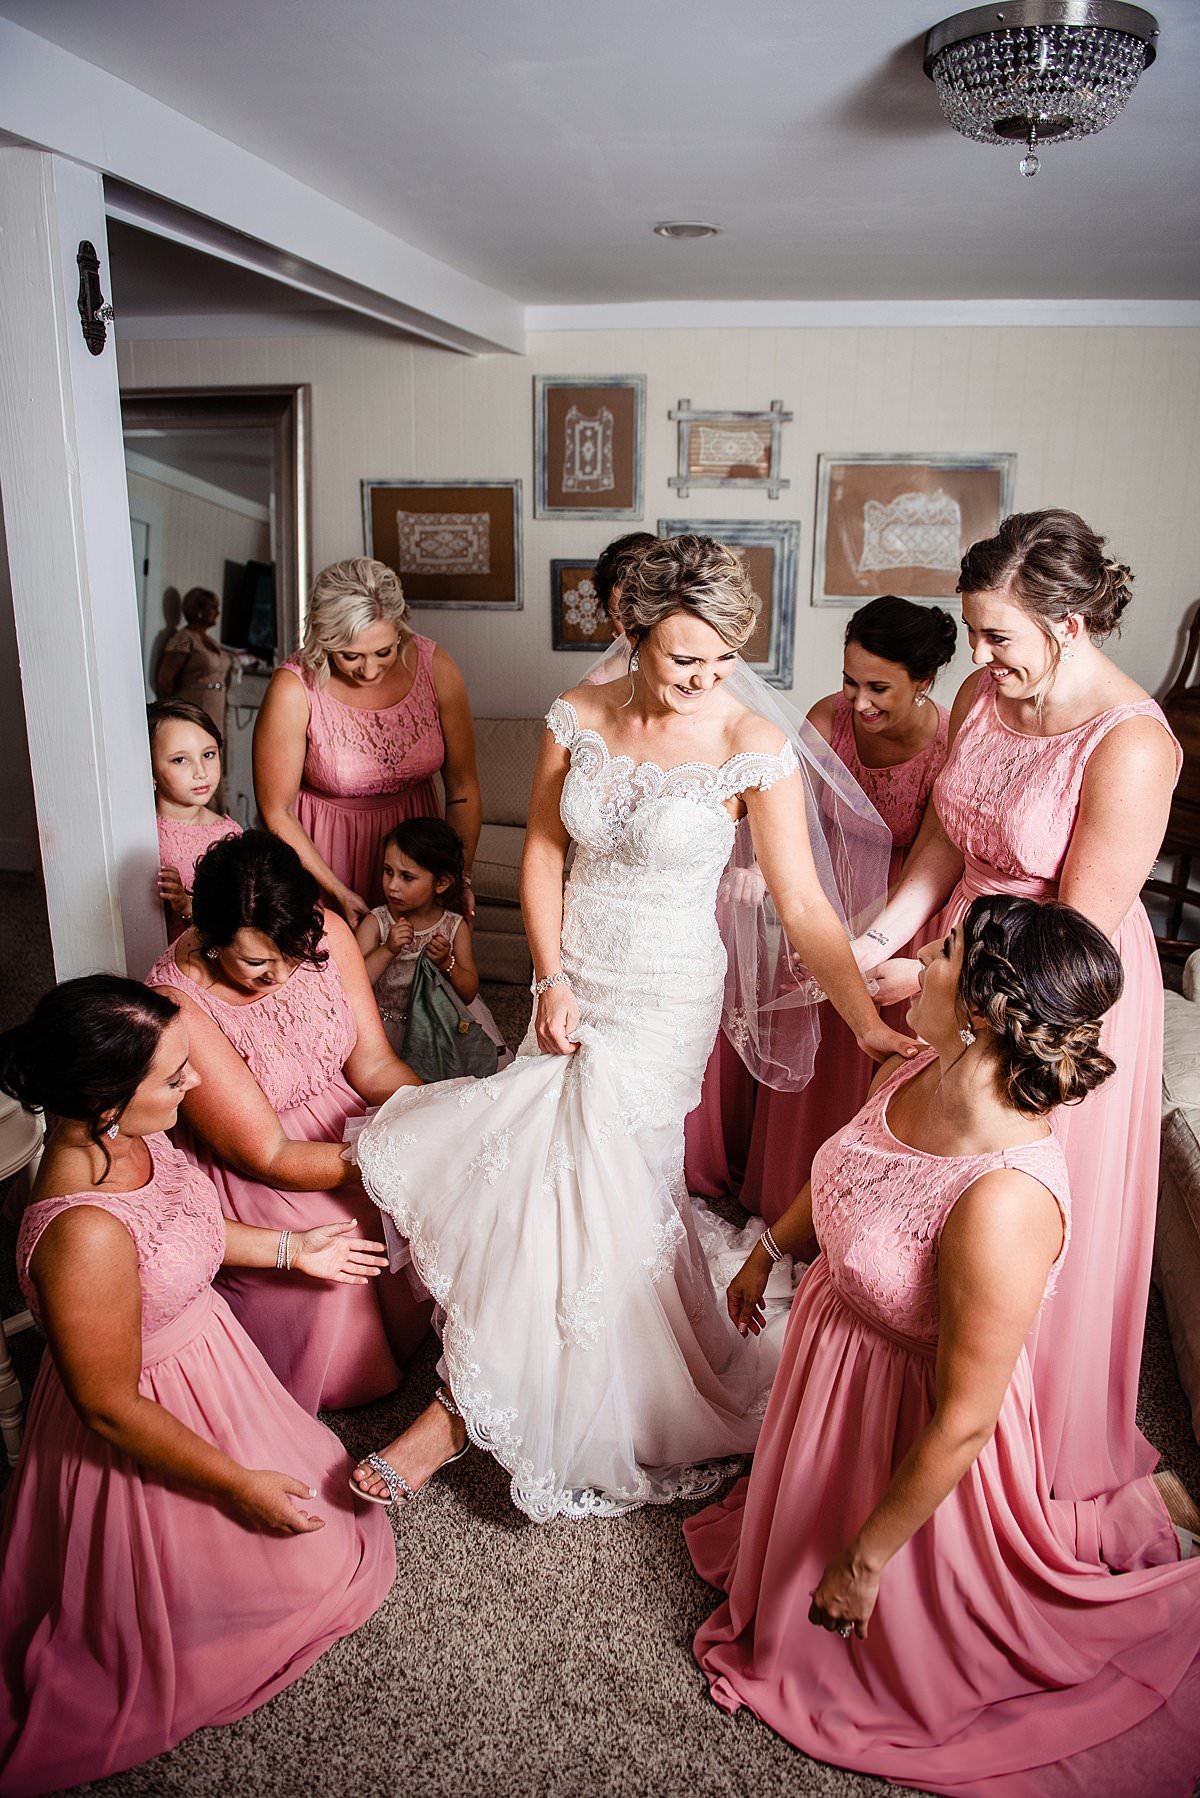 Bridesmaids gathered around and helping bride getting her shoes on